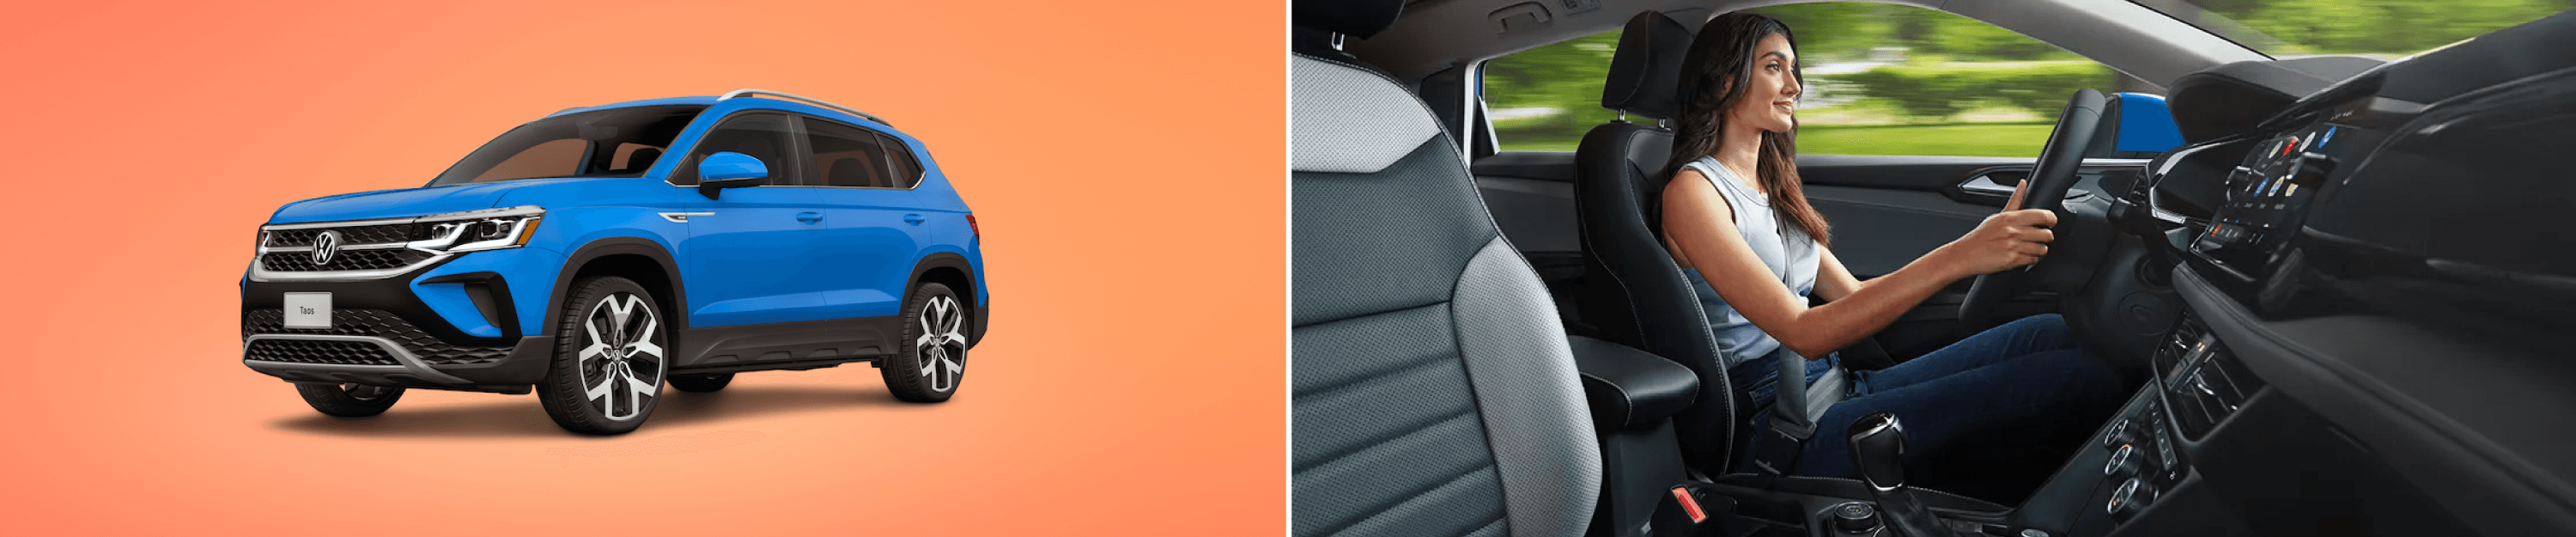 Volkswagen Taos Interior: Dimensions, Colors, and More!